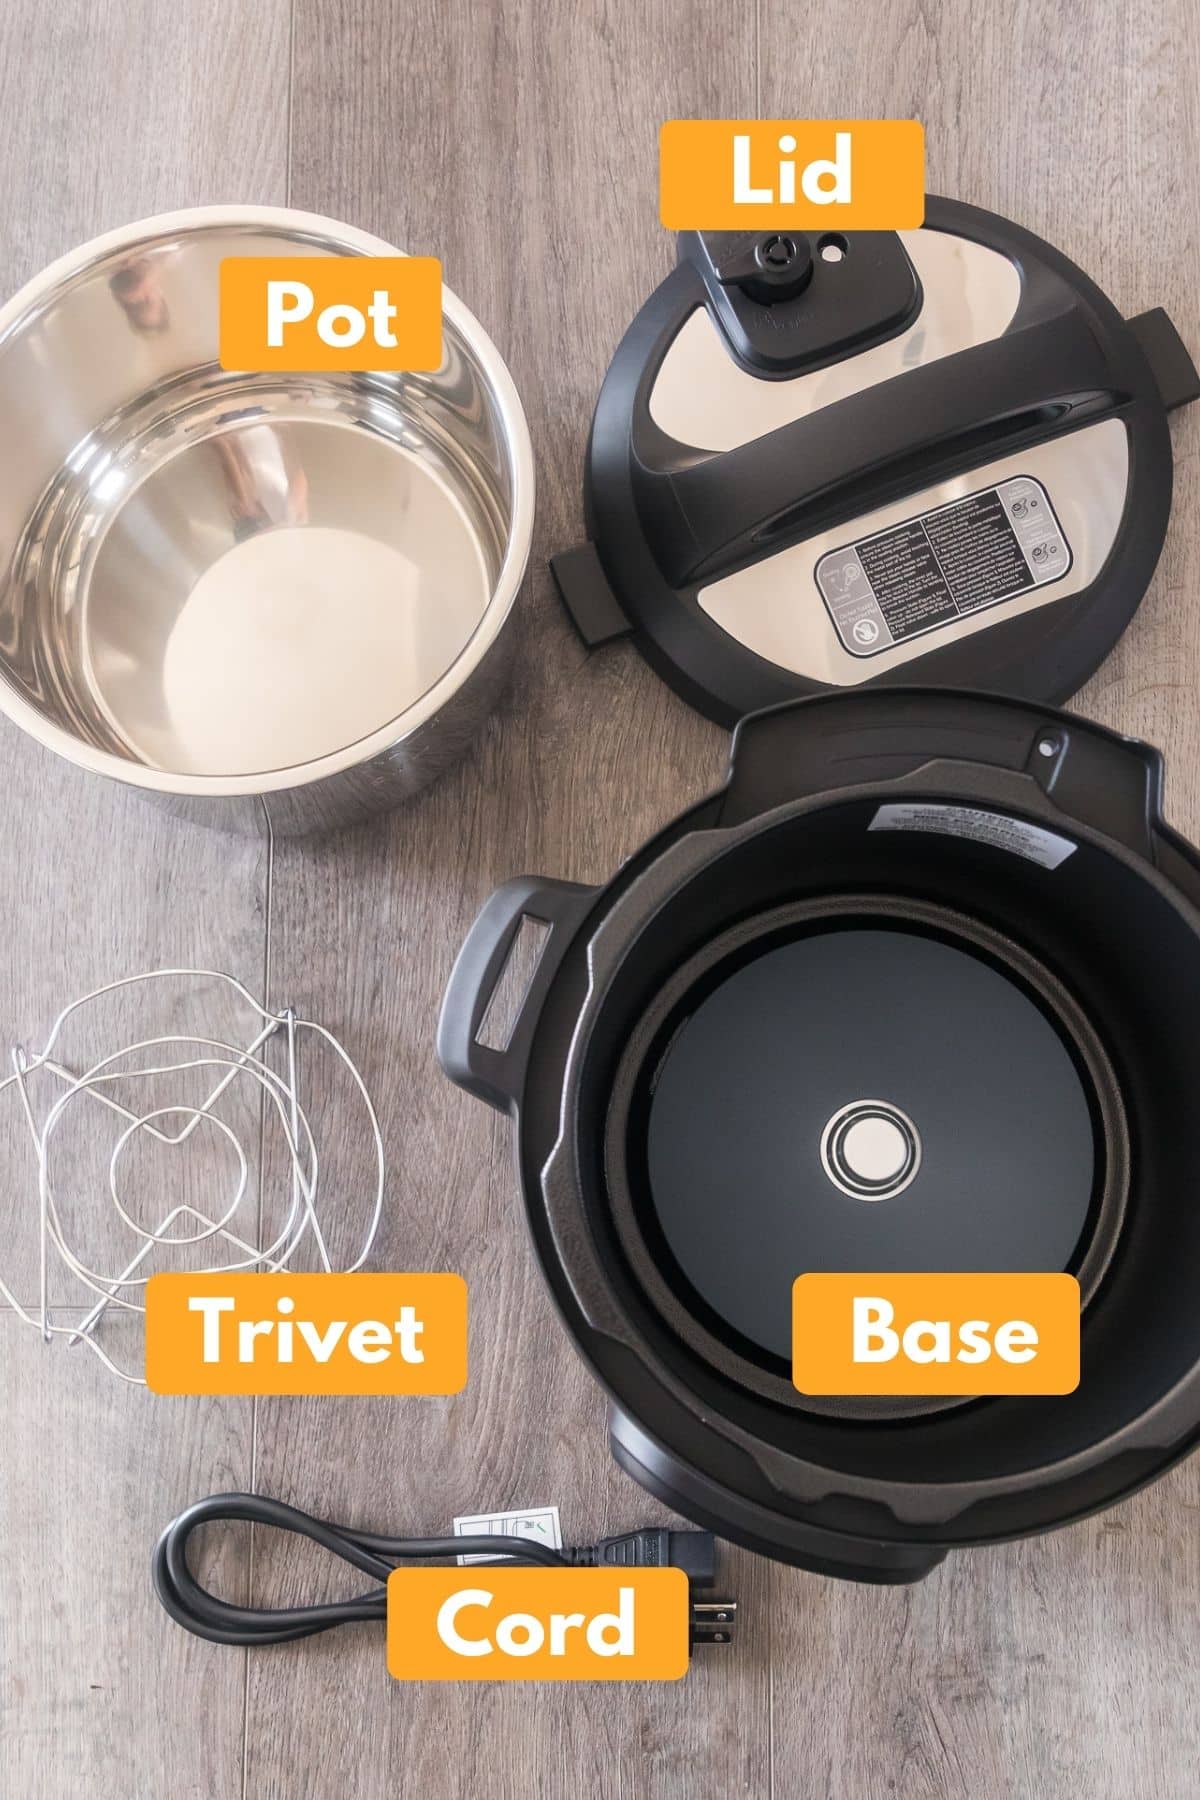 https://www.cleaneatingkitchen.com/wp-content/uploads/2021/02/photo-with-labeled-ingredients-for-parts-of-the-instant-pot-duo.jpg